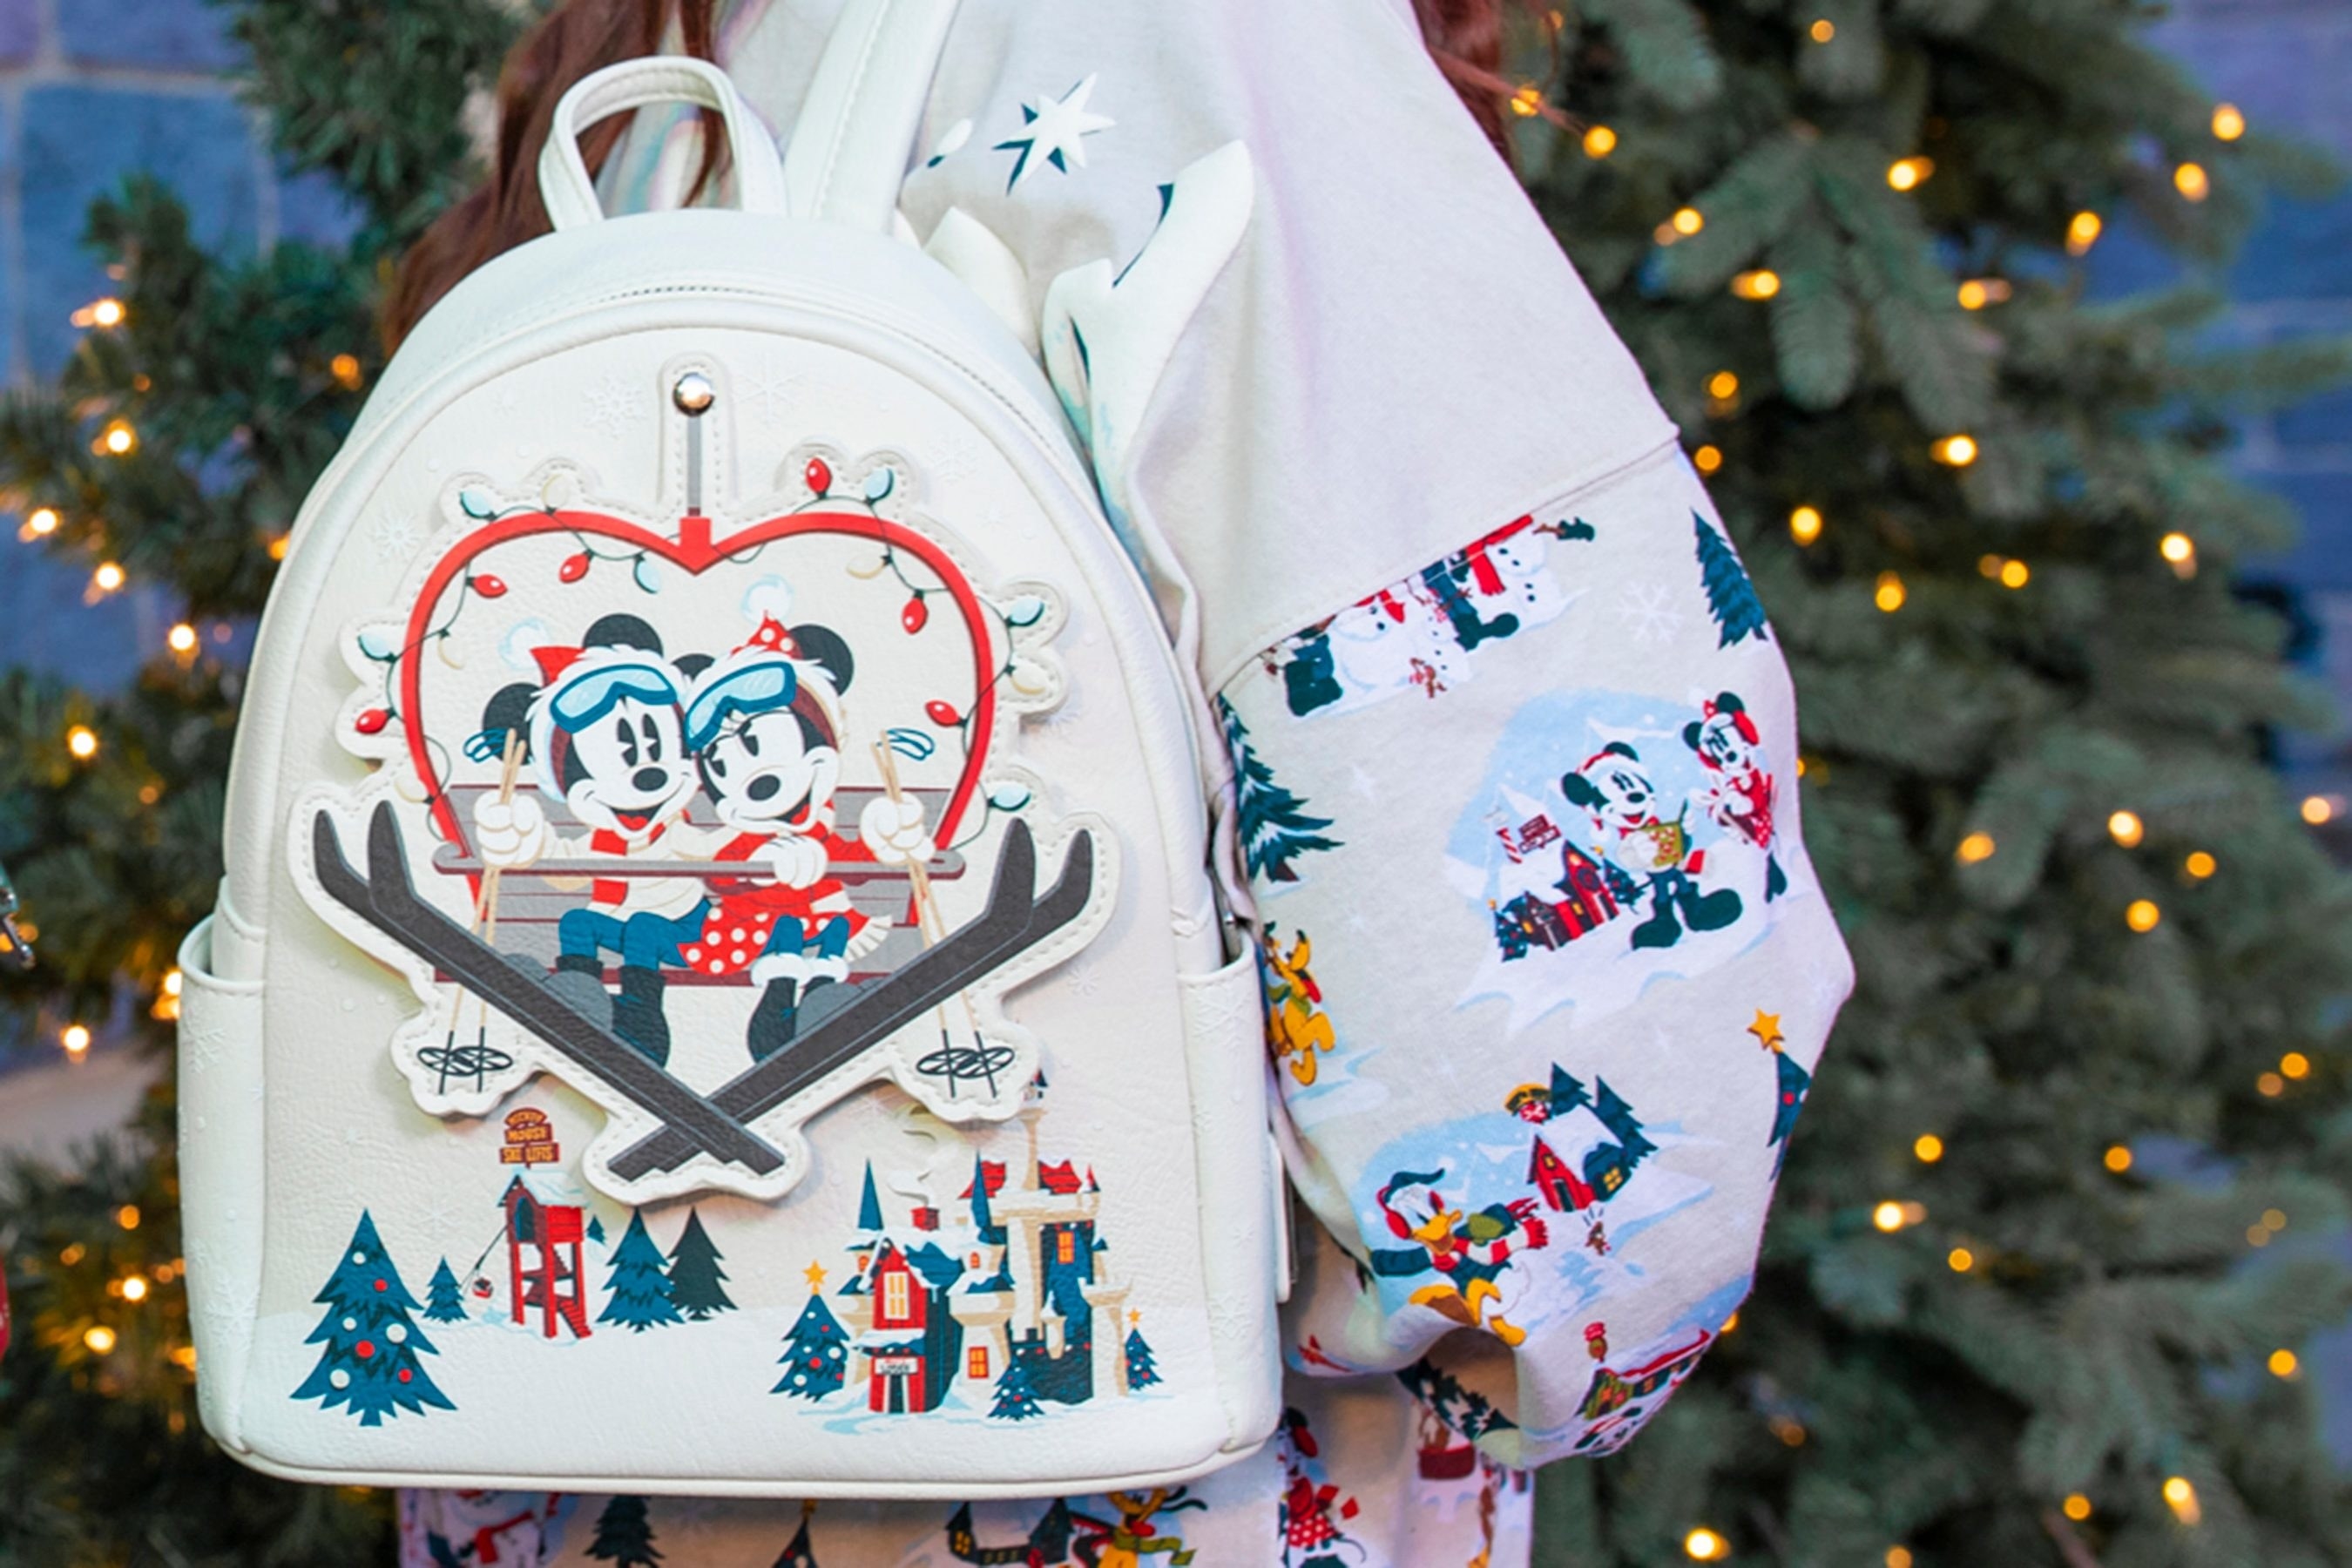 A white leather backpack with minnie and mickey on a ski lift shaped like a heart